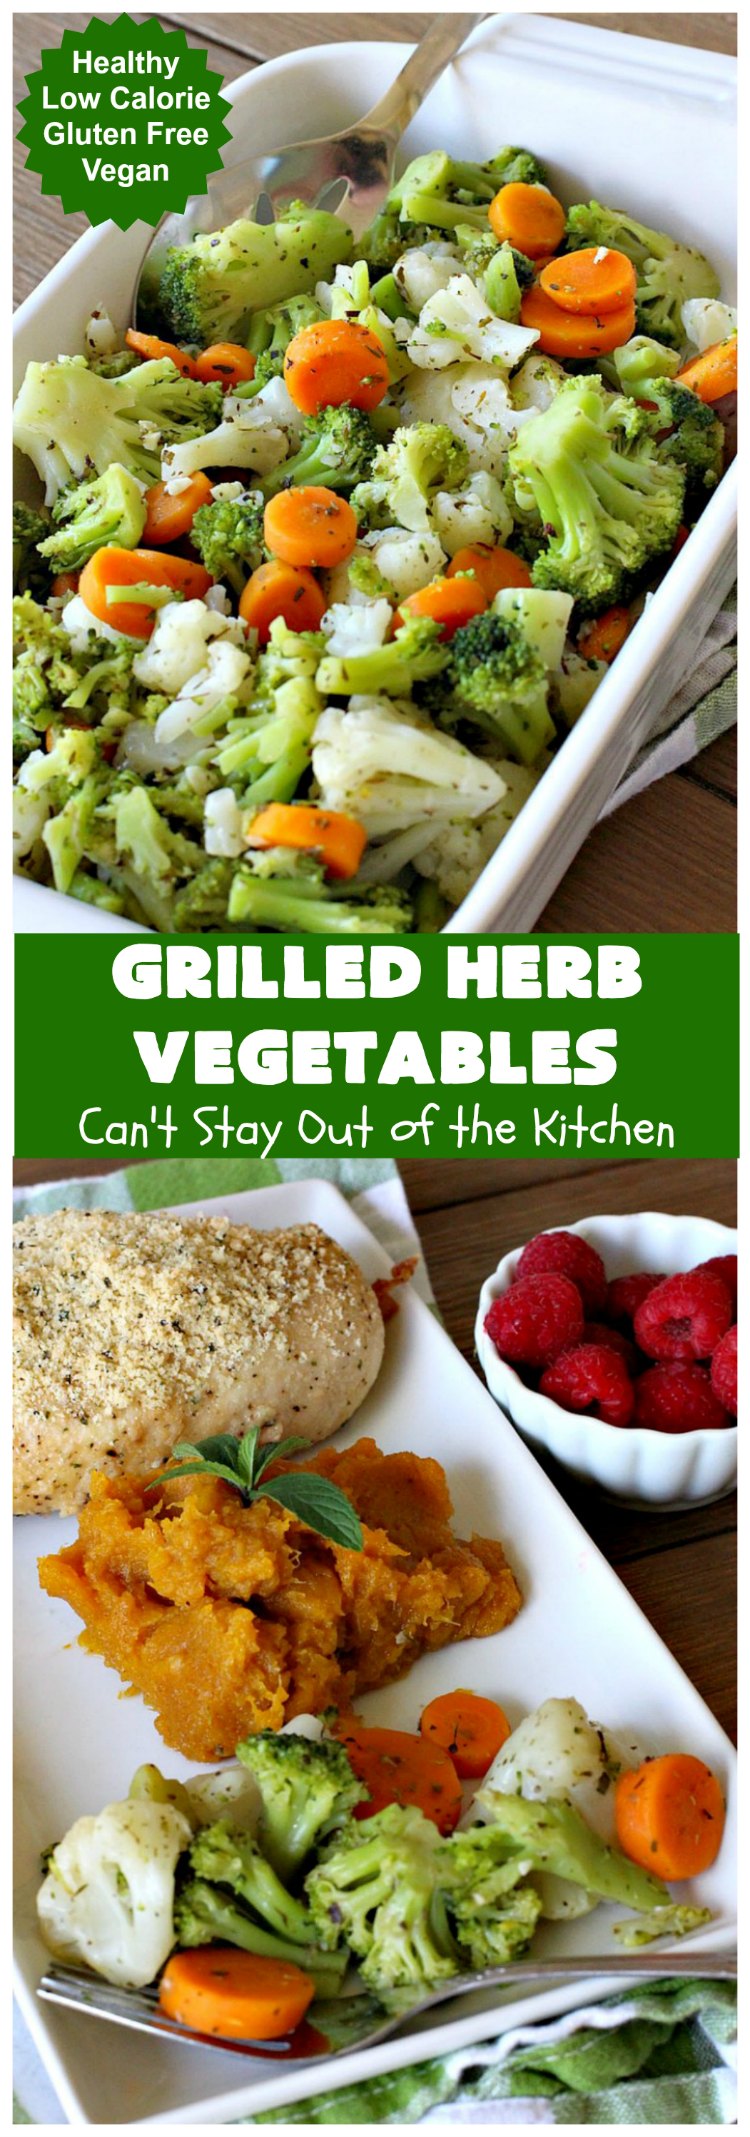 Grilled Herb Vegetables | Can't Stay Out of the Kitchen | this quick & easy 5-ingredient #recipe can be ready to serve in 20 minutes! Tasty, delicious way to prepare #vegetables  especially if you have the grill going. #carrots #Broccoli #Cauliflower #Healthy, #vegan #LowCalorie #GlutenFree #GrilledHerbVegetables